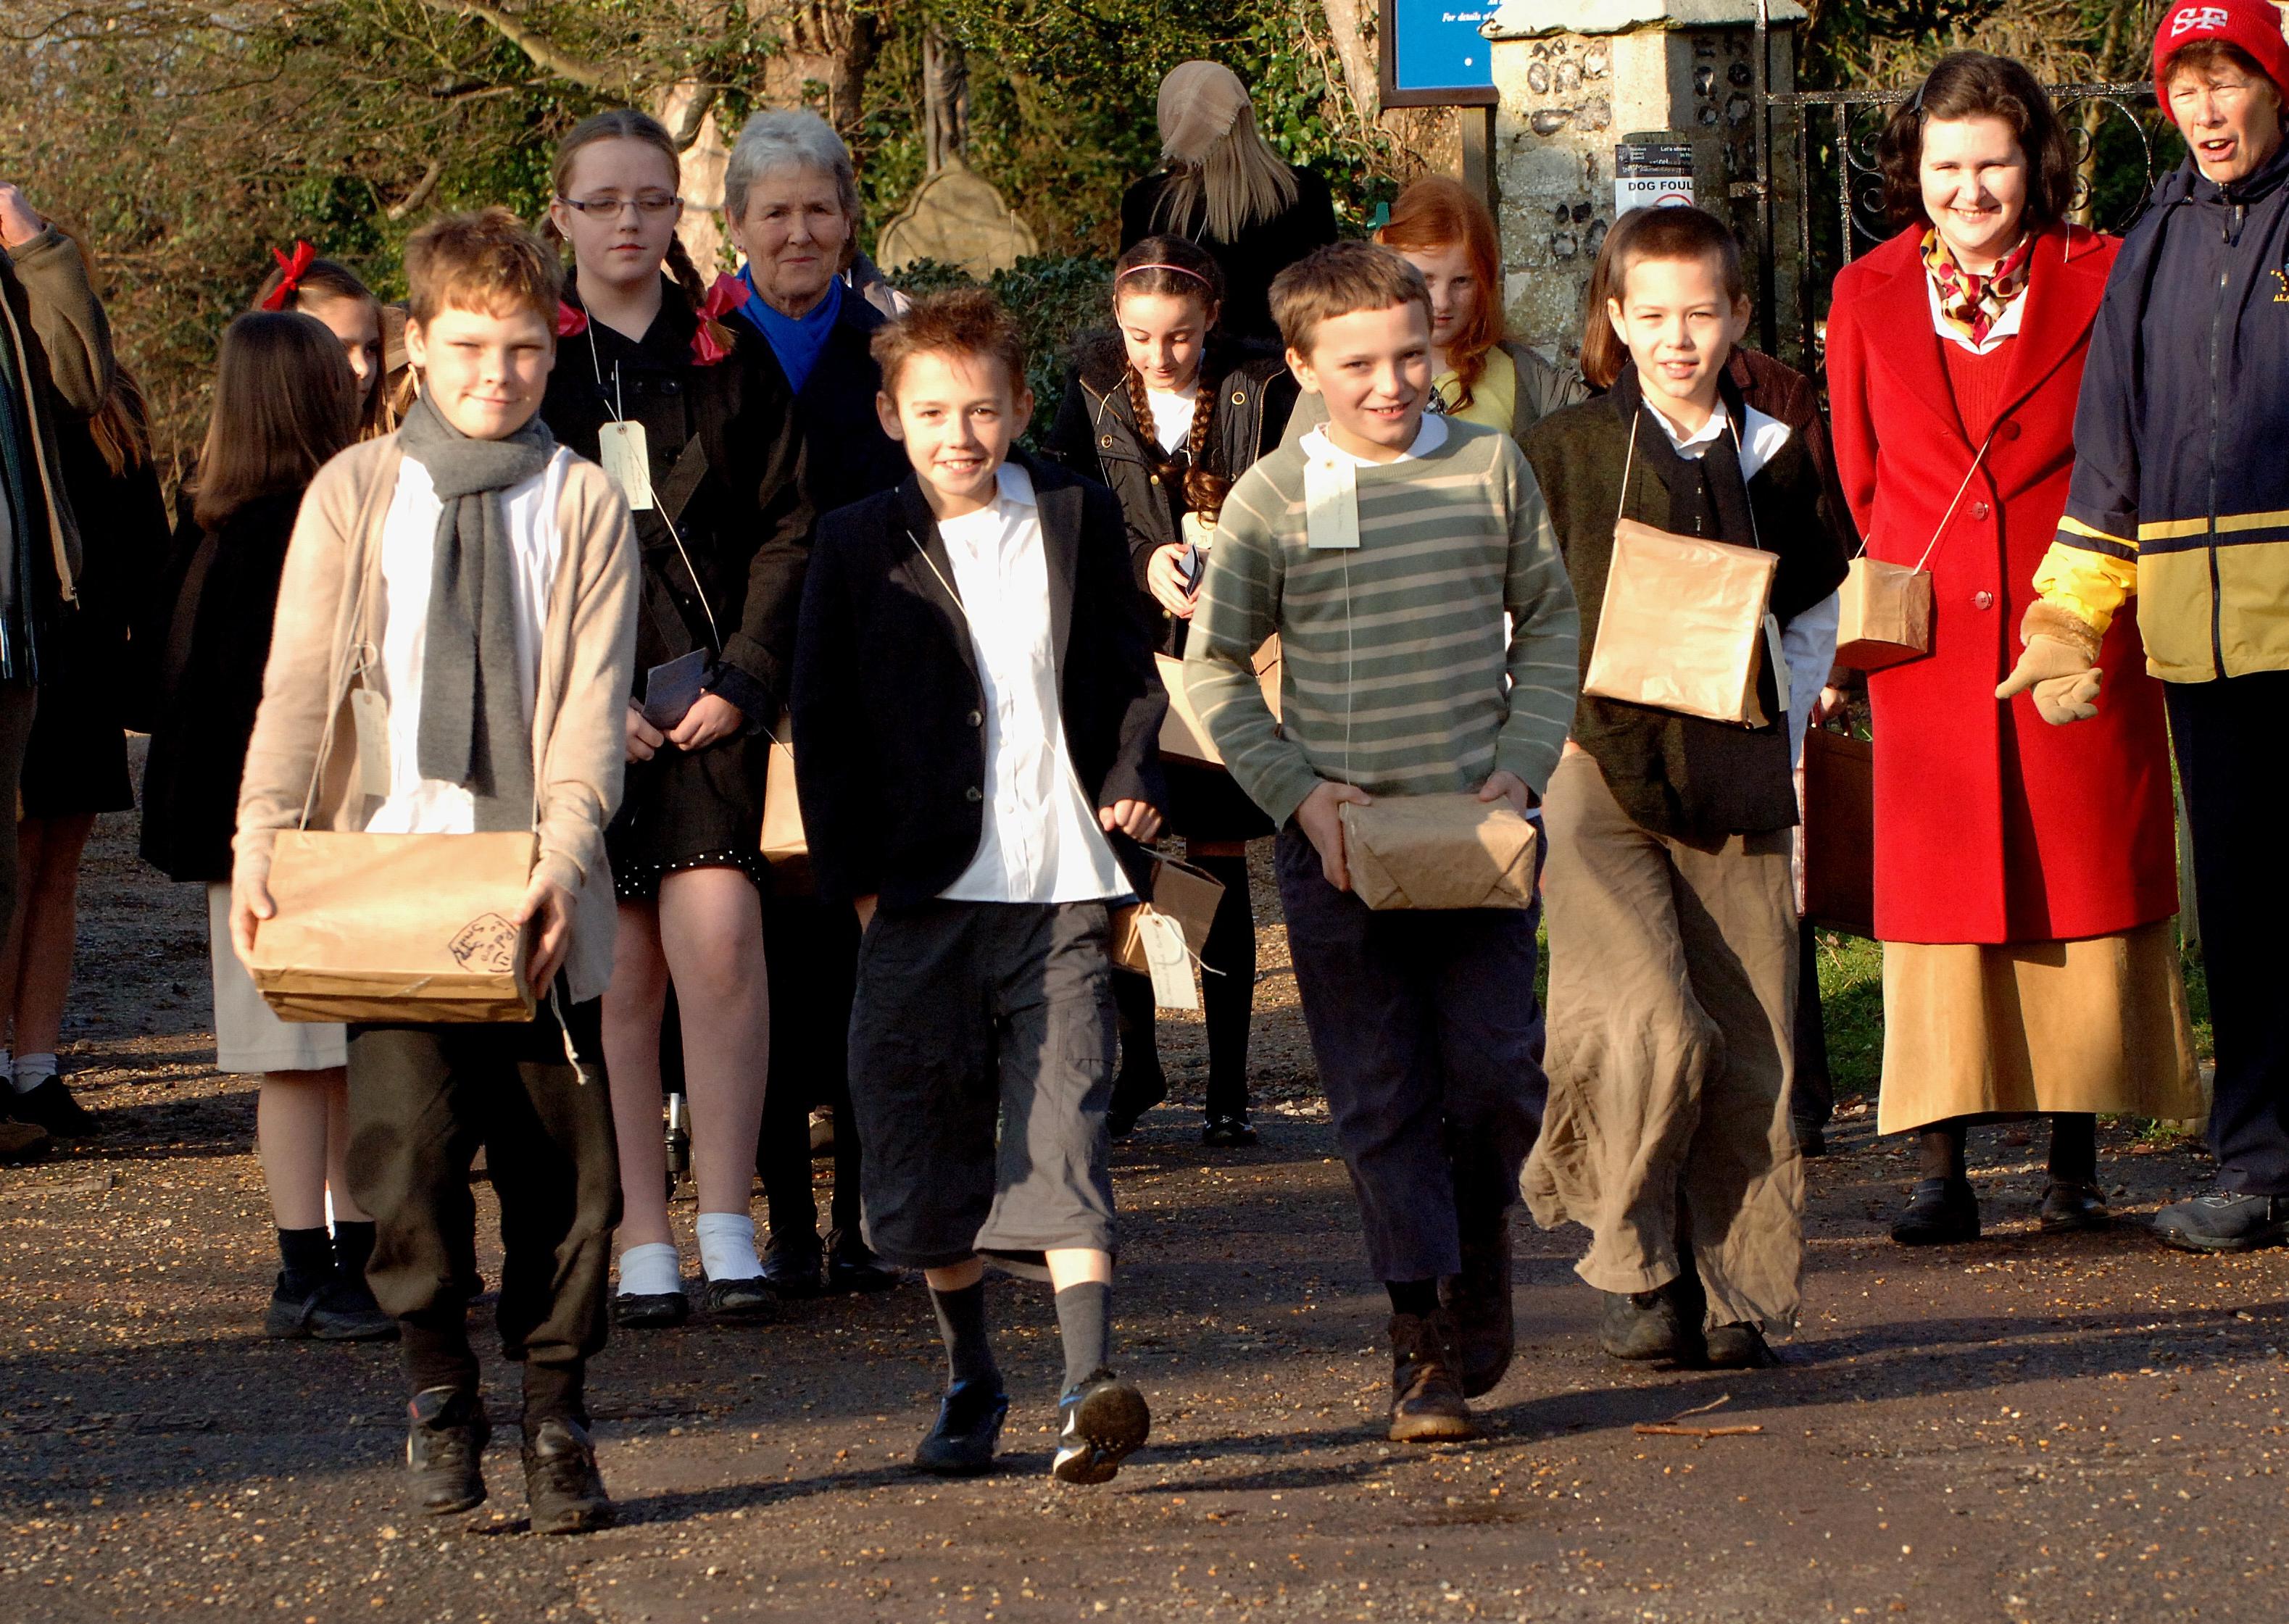 Upper Beeding Primary School being evacuated. Some of the children taking part. Photo by Stephen Goodger